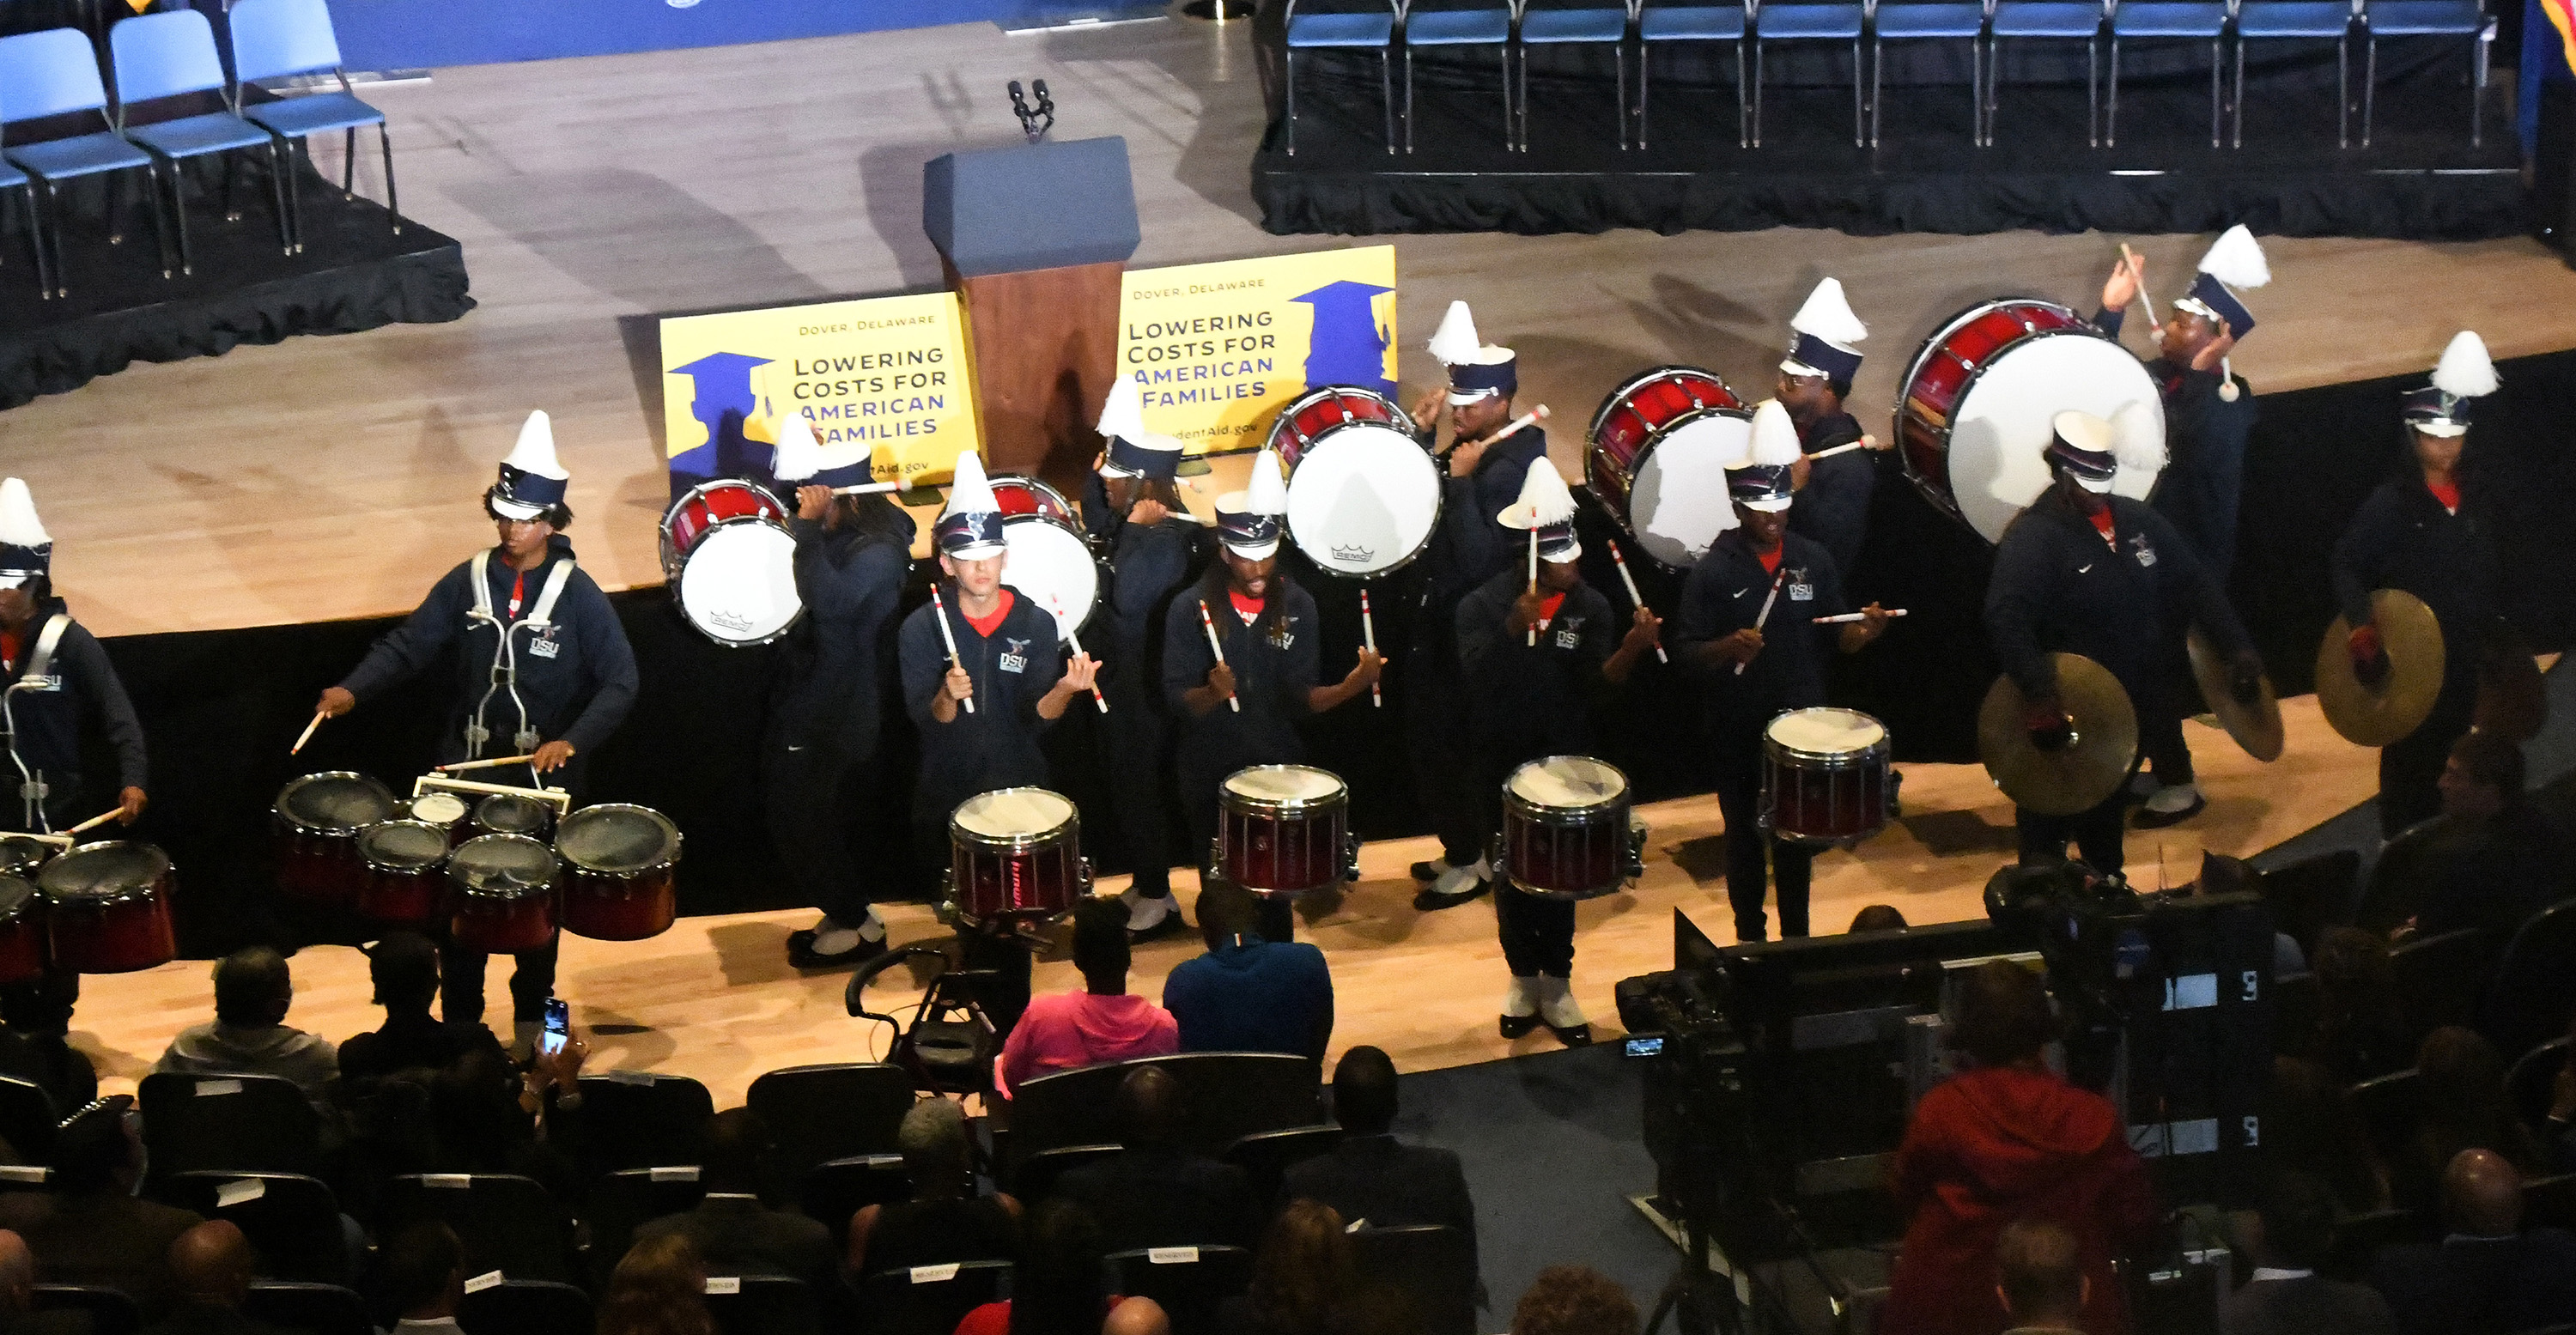 The University's Drum Line provided entertain while the over-900 people awaited the arrival of President Biden.